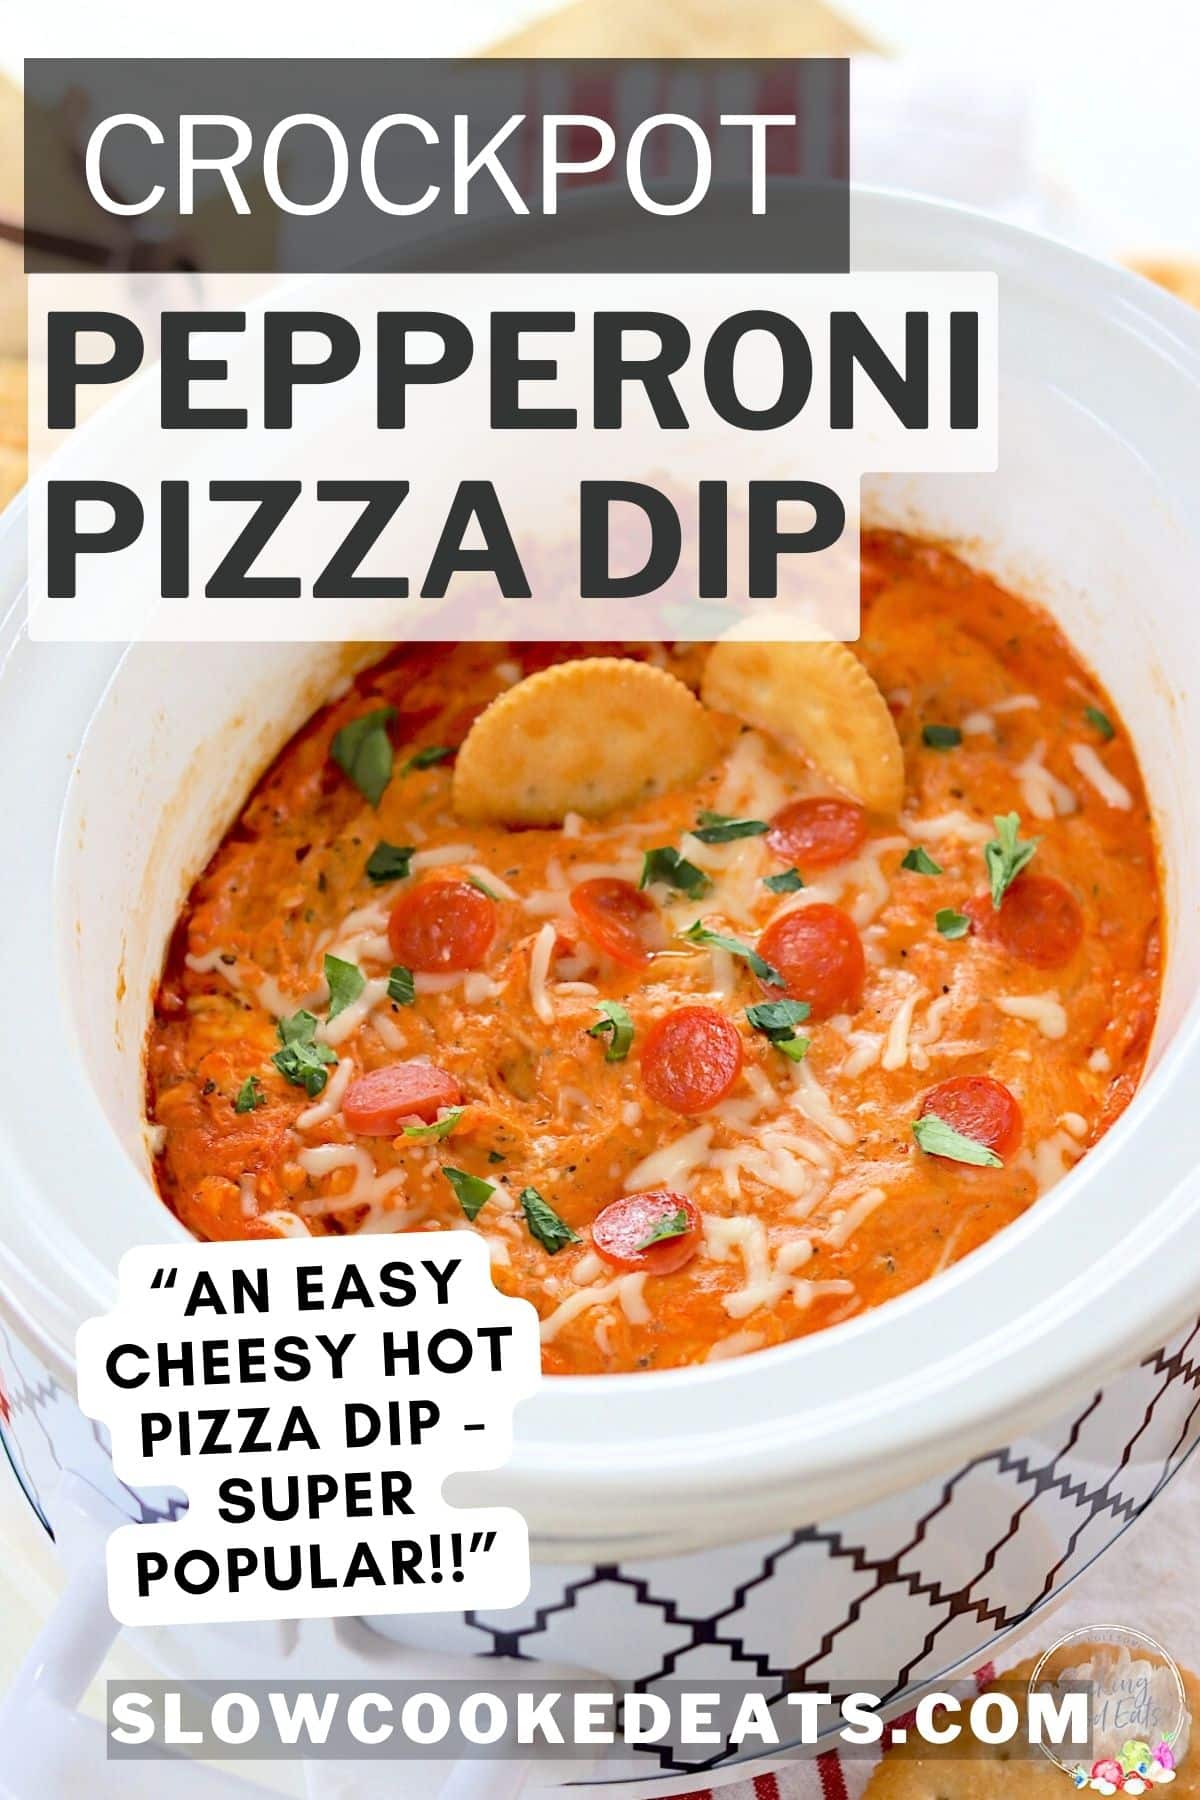 Crockpot pizza dip in an oval white slow cooker.